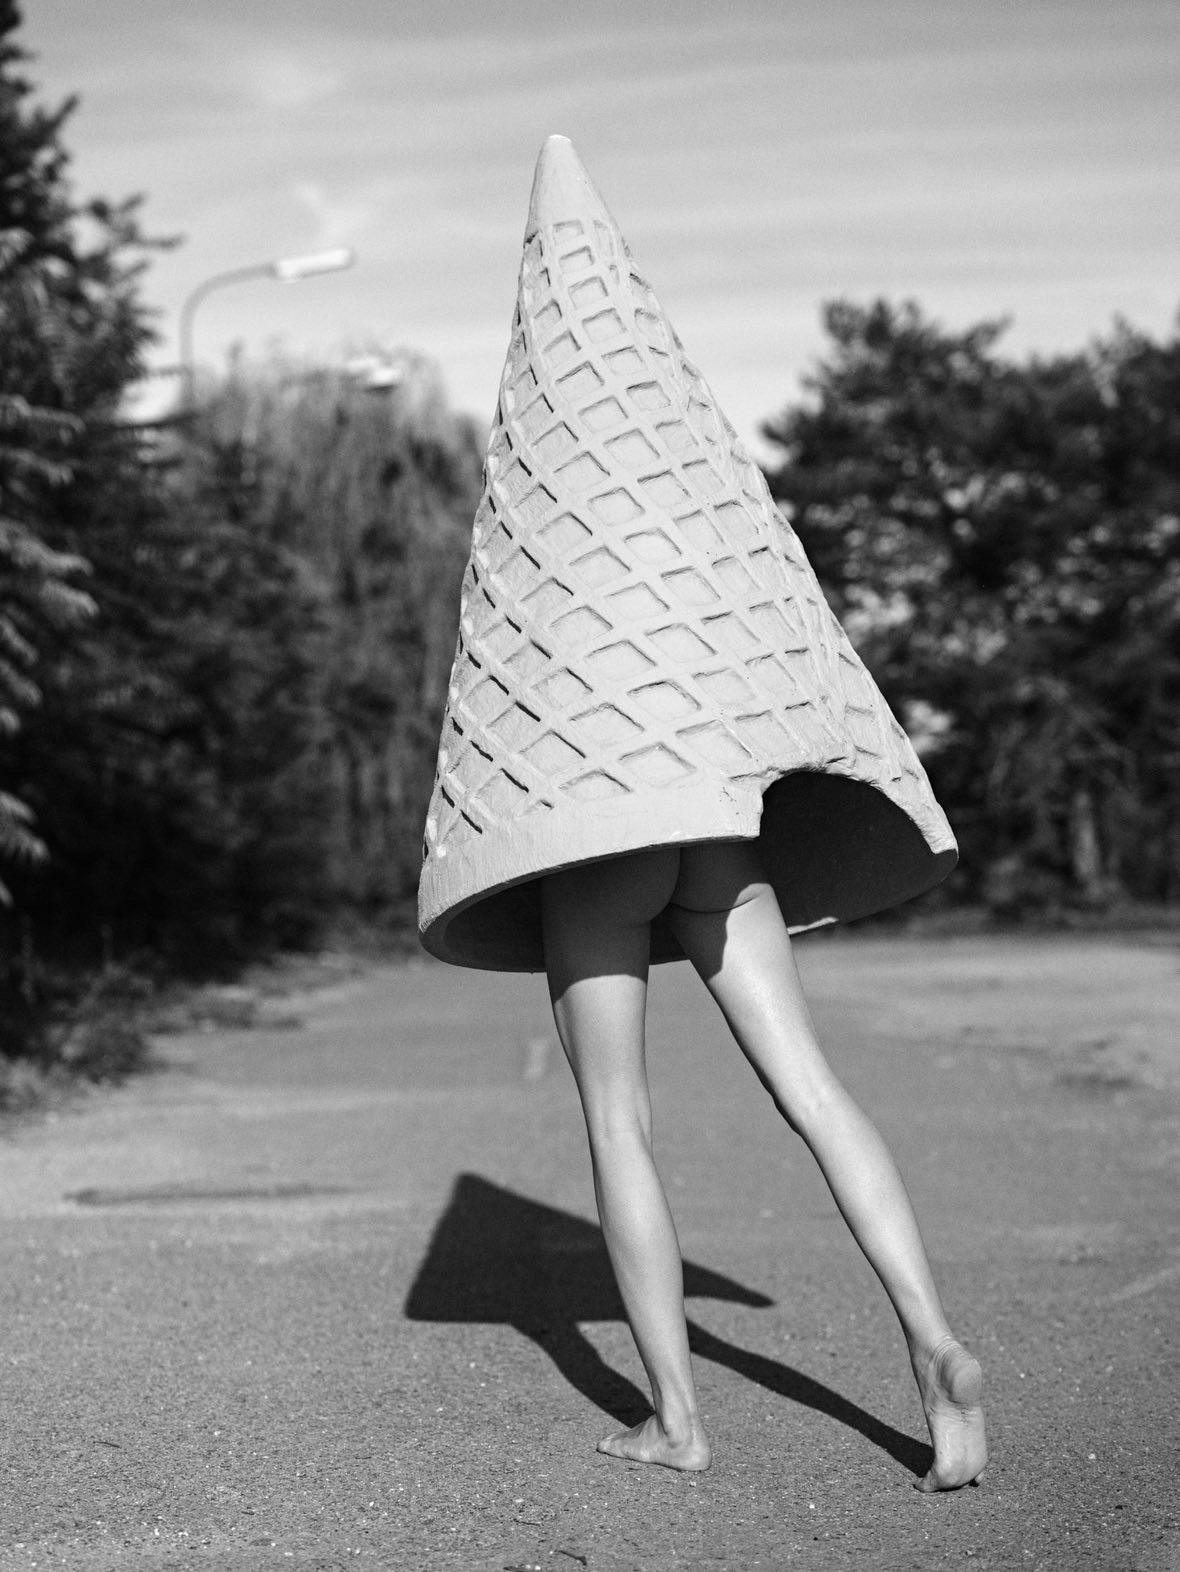 "Ice Cream on the Run" Photography 32" x 24" inch  Edition of 5 by Lukas Dvorak

32" x 24" inch 
Pigment print on Epson Fine ART paper
2023

Ships rolled in a tube 

ABOUT THE ARTIST
Lukas Dvorak is a Czech photographer born in Prague in 1982. His